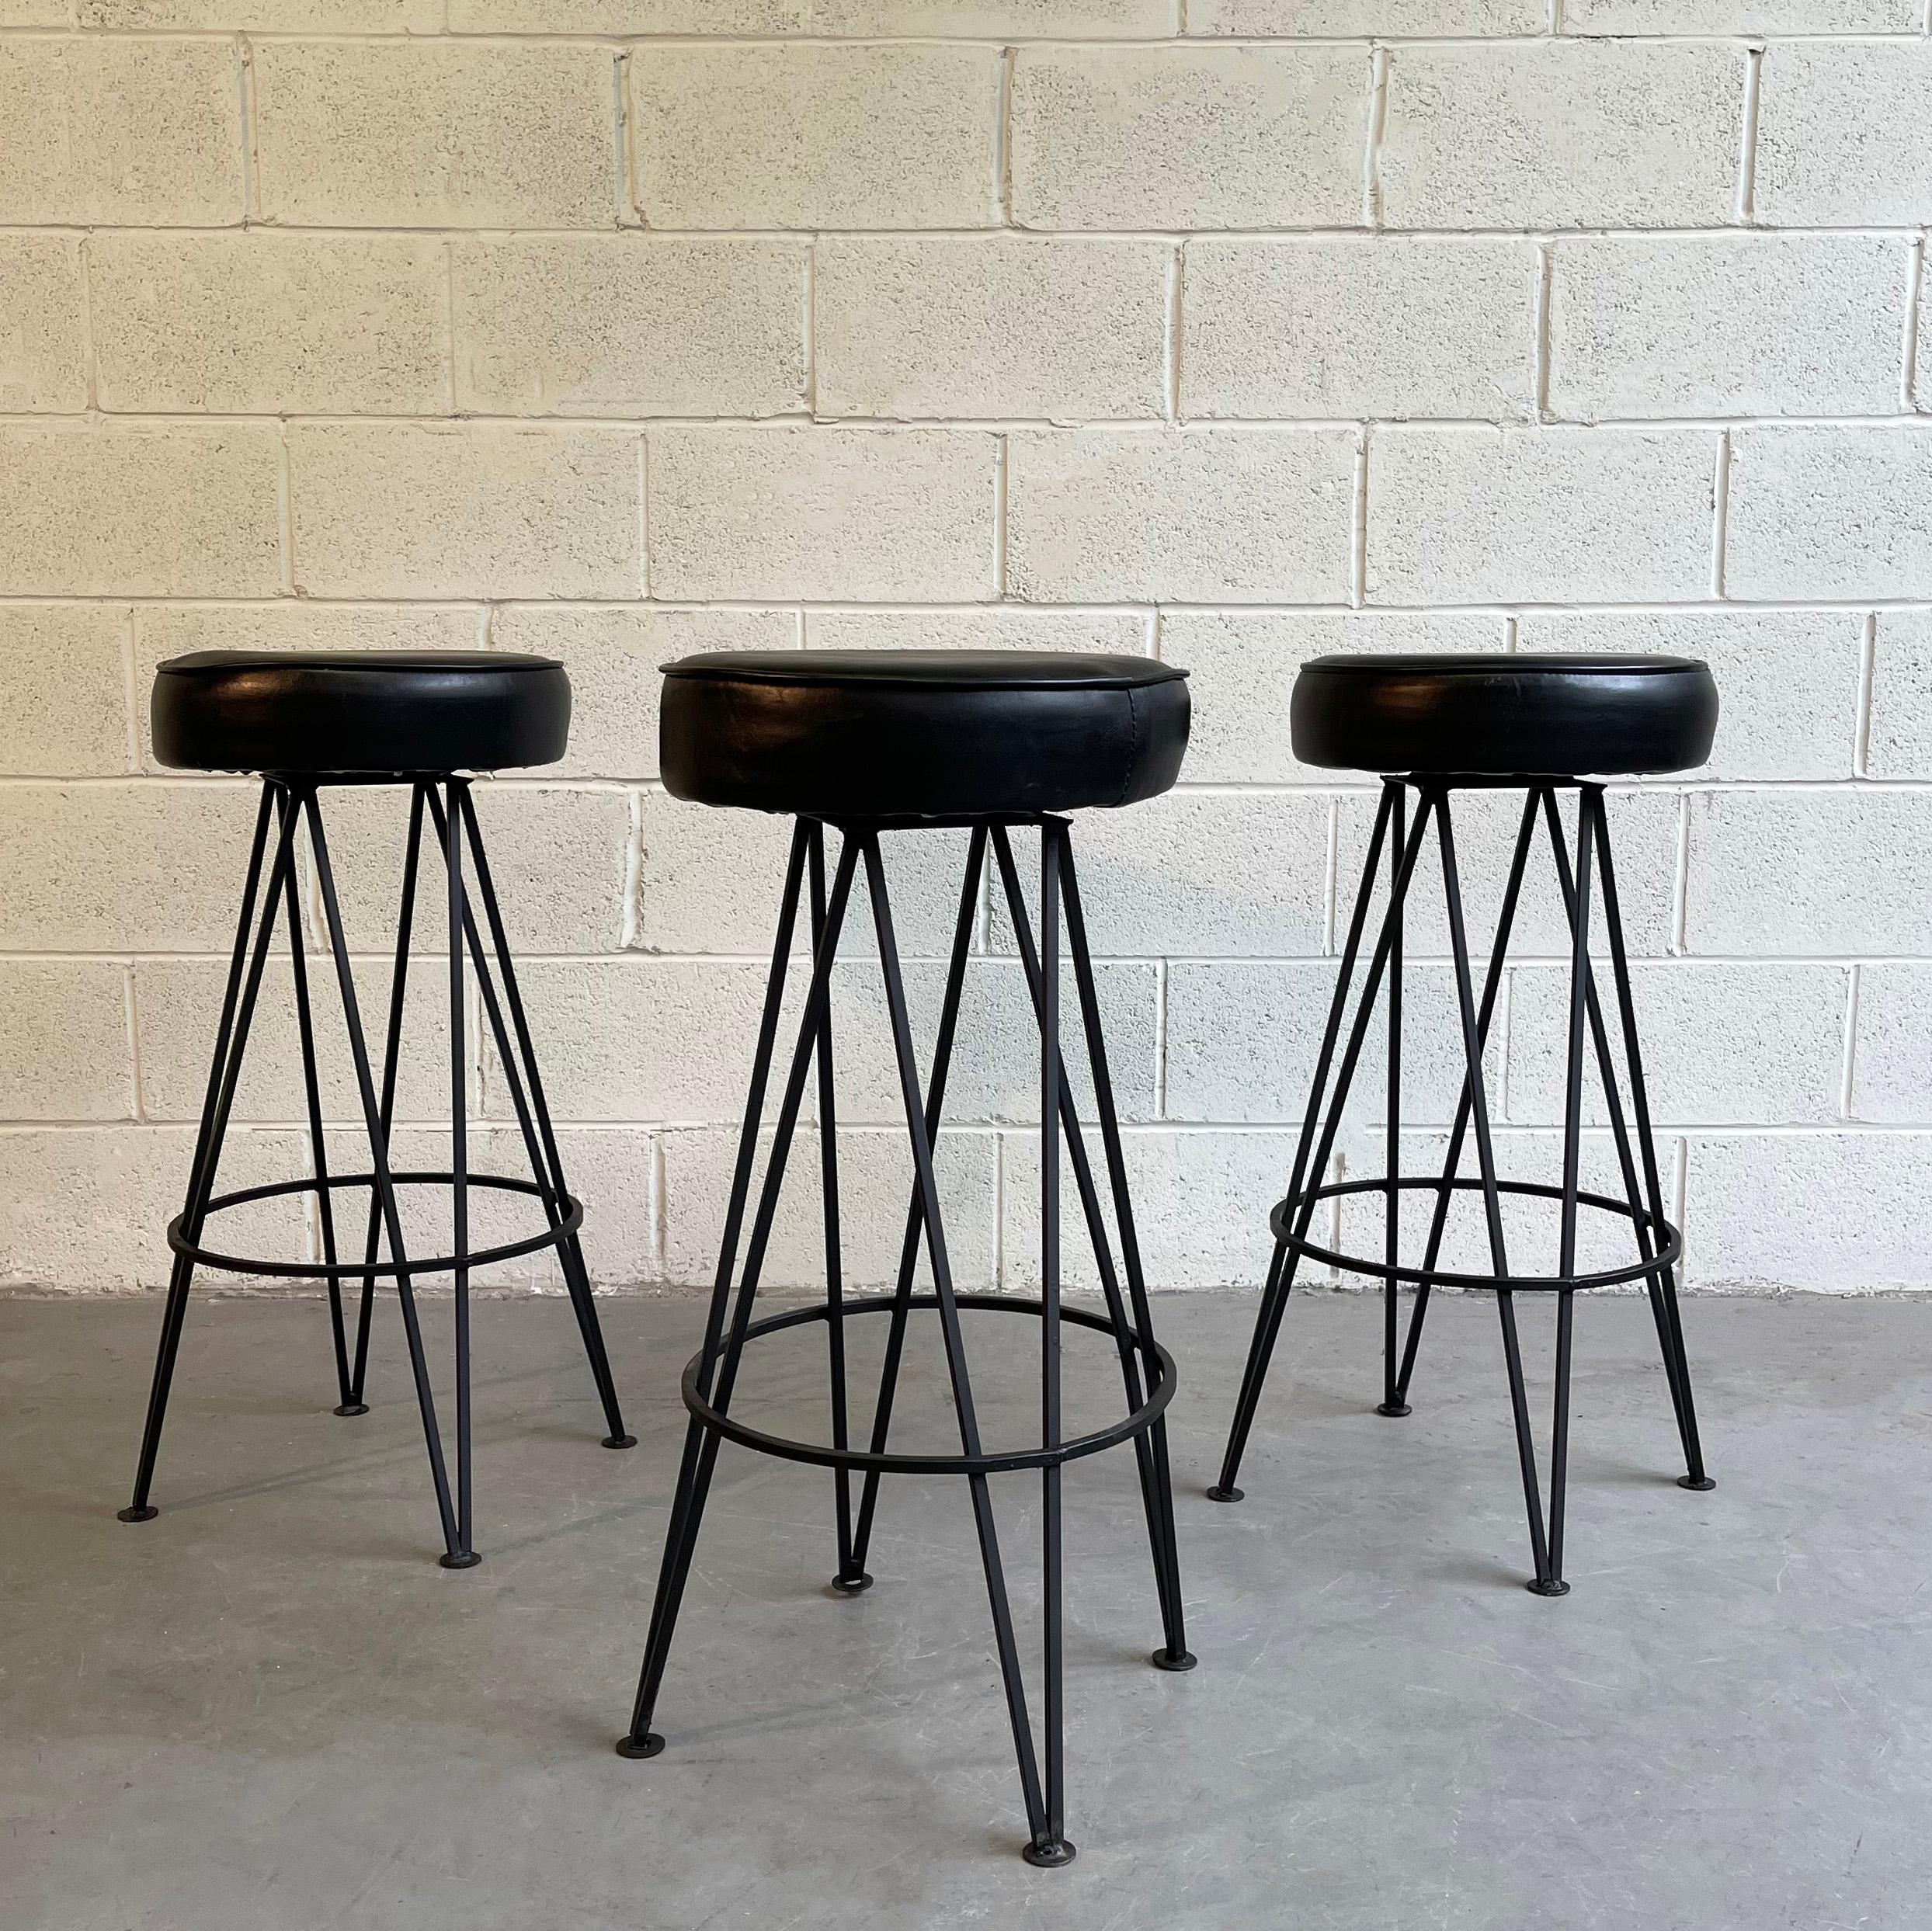 Set of 3, Mid-Century Modern, bar stools feature hairpin, wrought iron bases with 14.5 inch diameter vinyl seats.